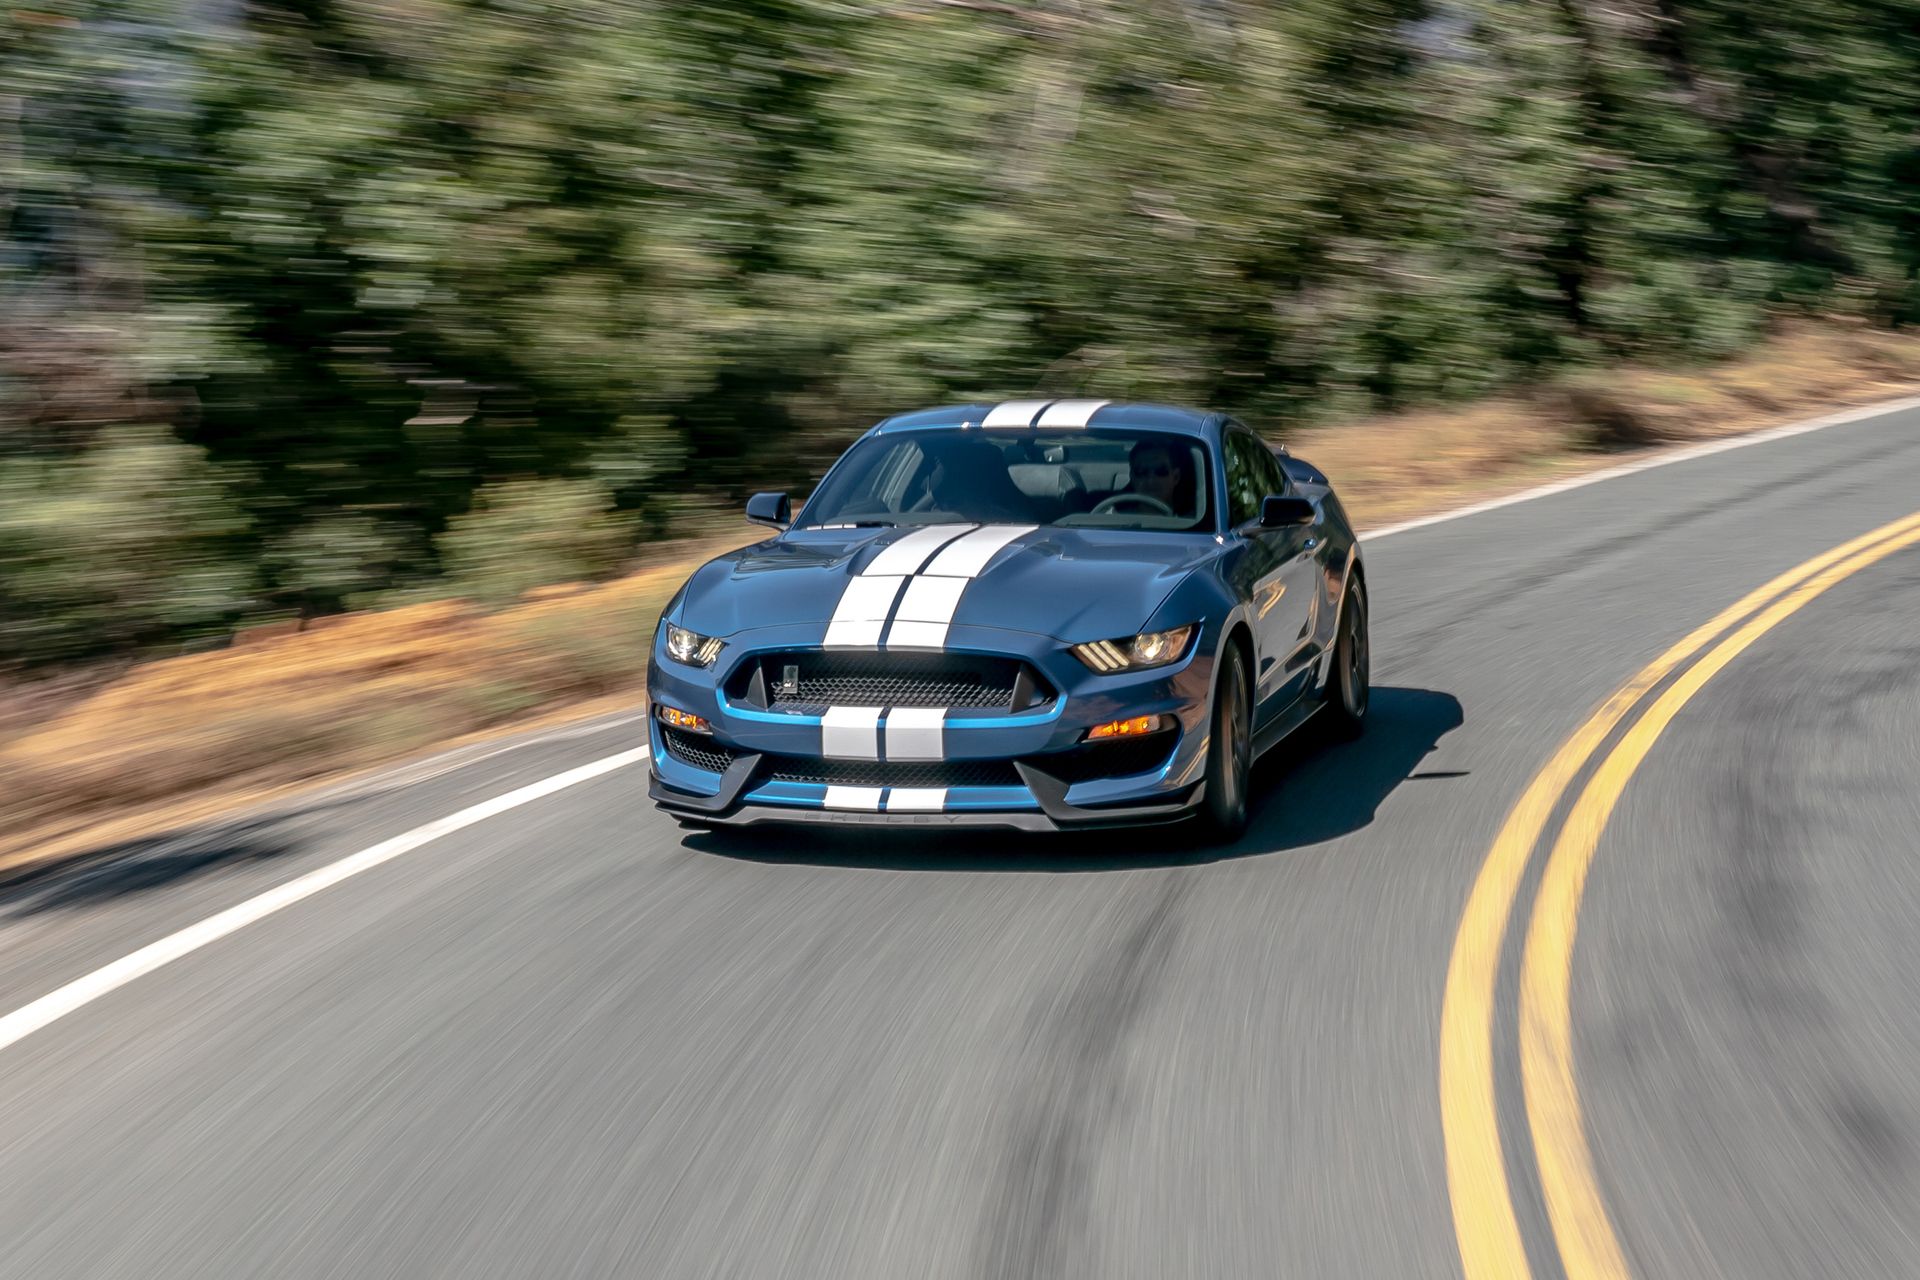 2019-ford-mustang-shelby-gt350-comparison-101-1569444849.jpg